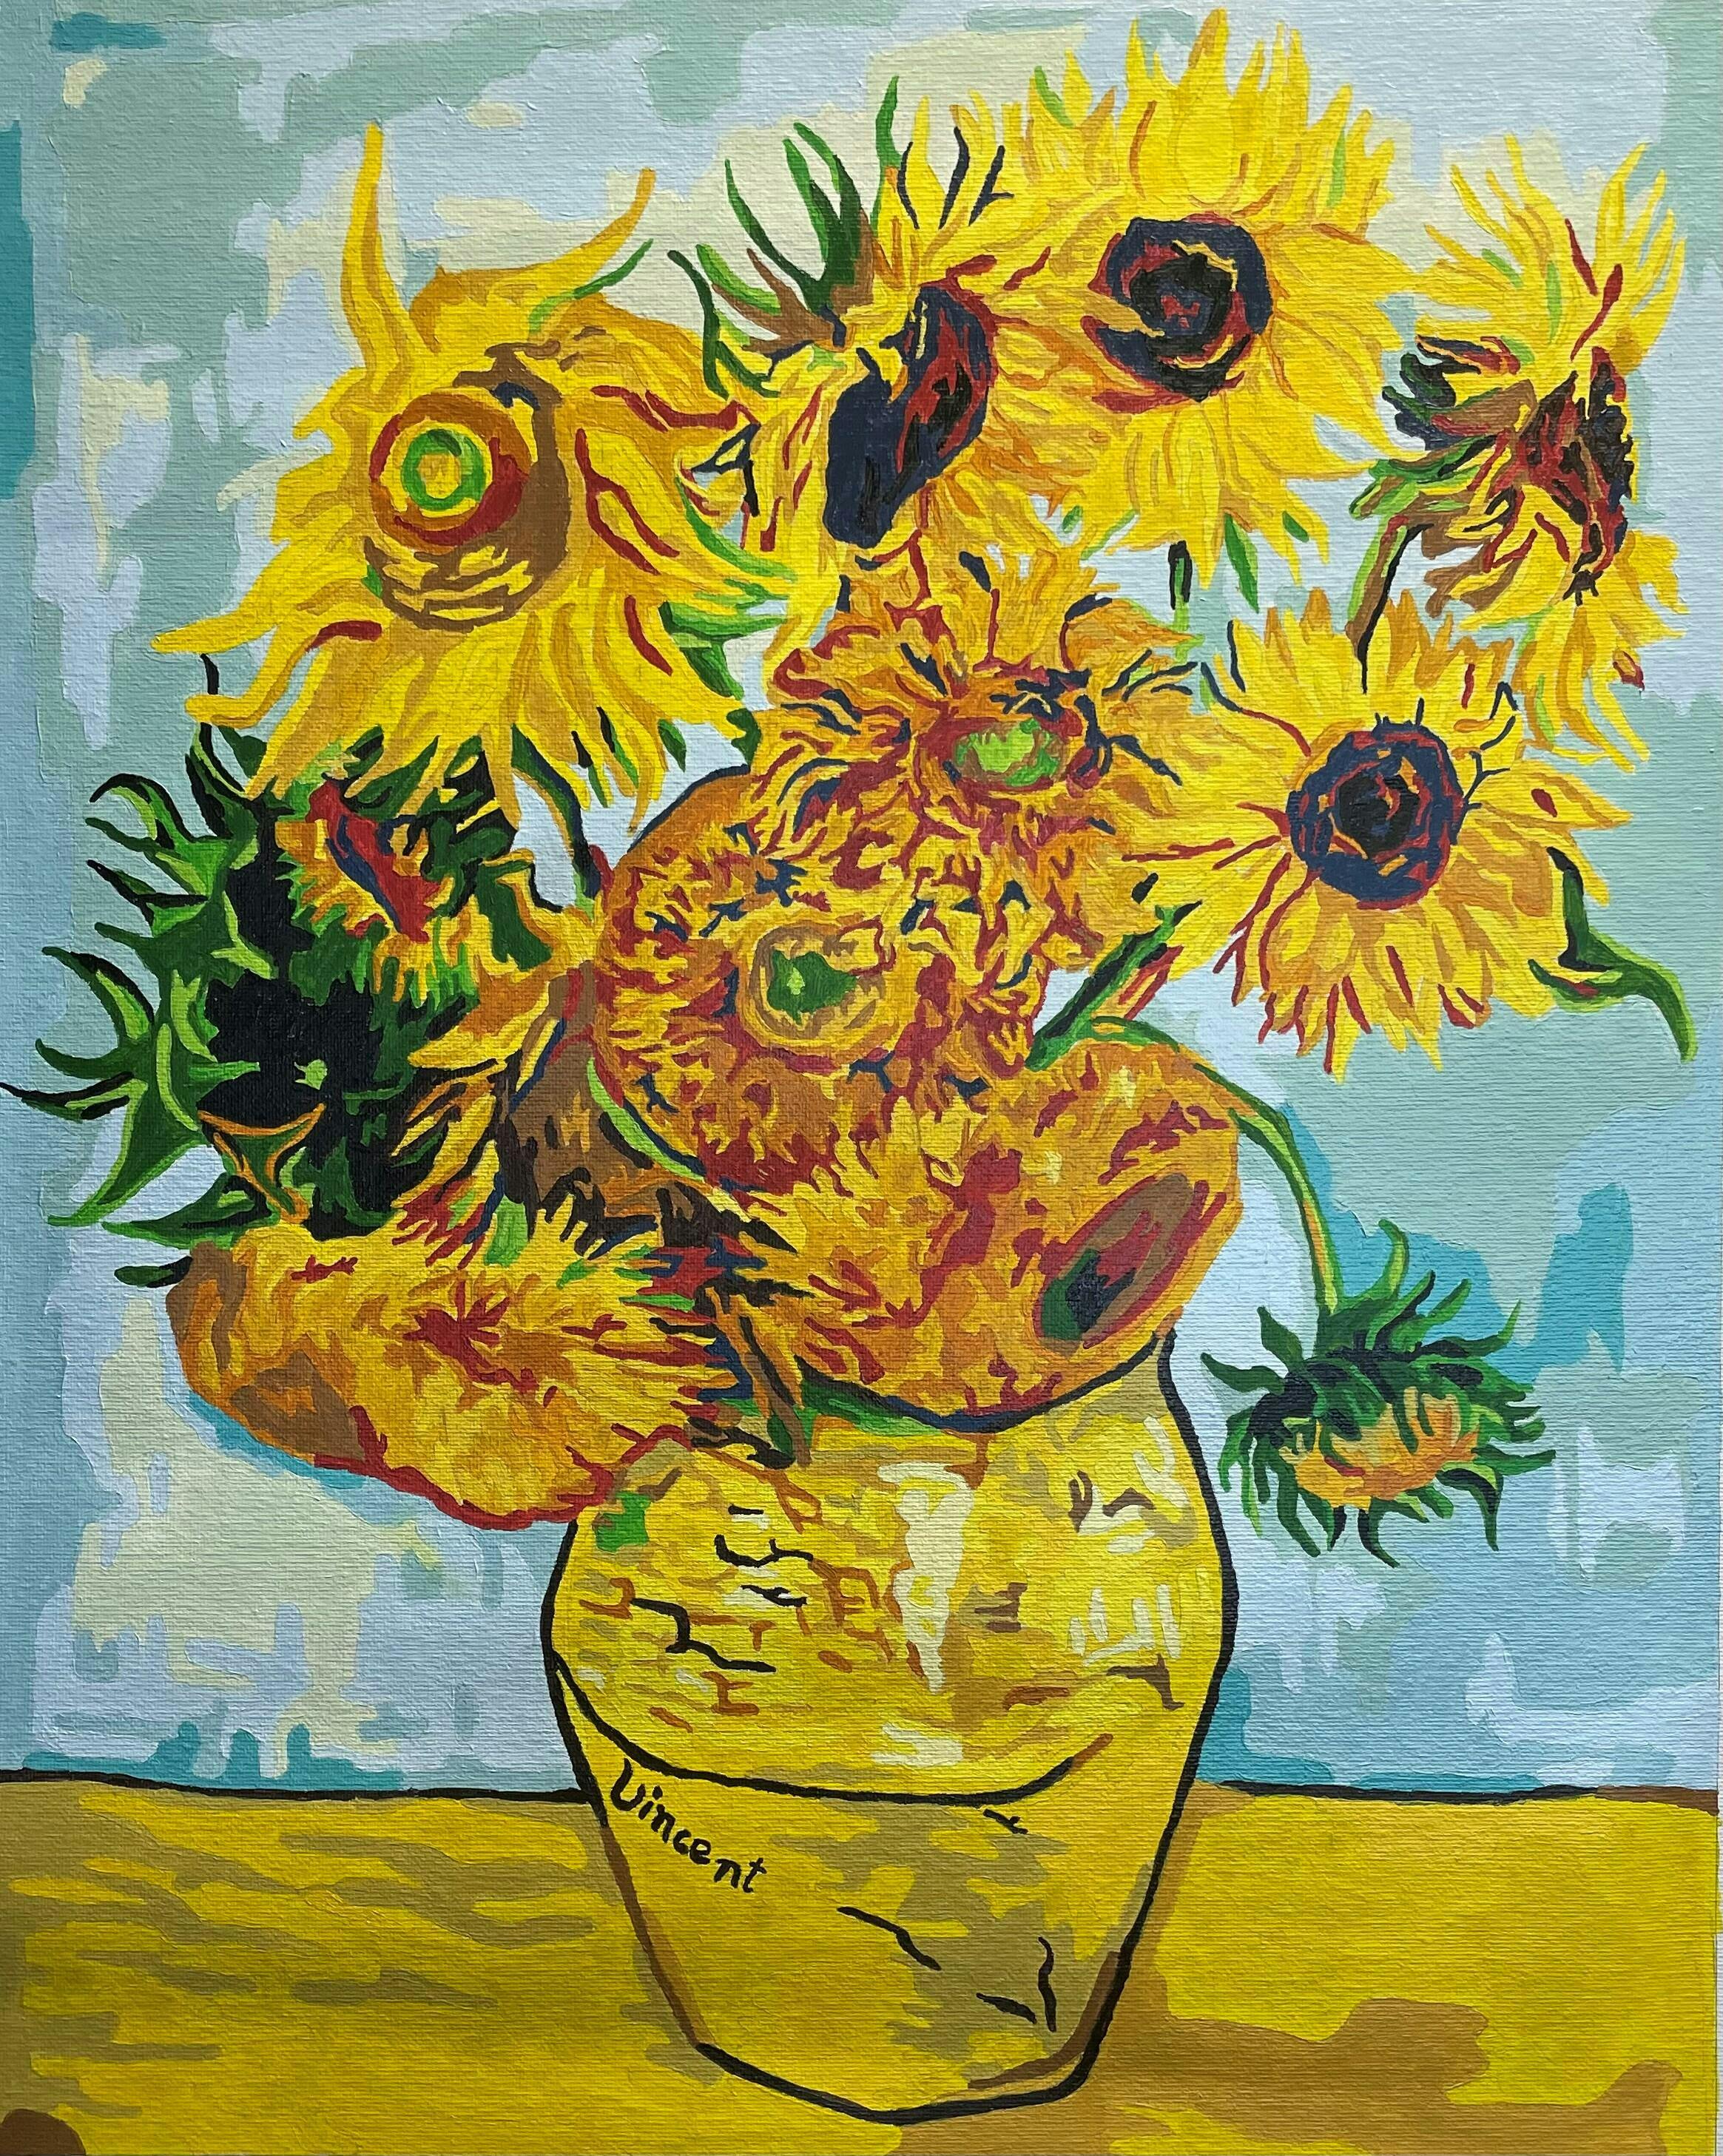 Vincent Van Gogh, Sunflowers, Art, Acrylic Painting, Craft, 3D, Crepe Paper  Flowers for Home Decor, Wall Art, Gifting, Sending Sunshine - Etsy